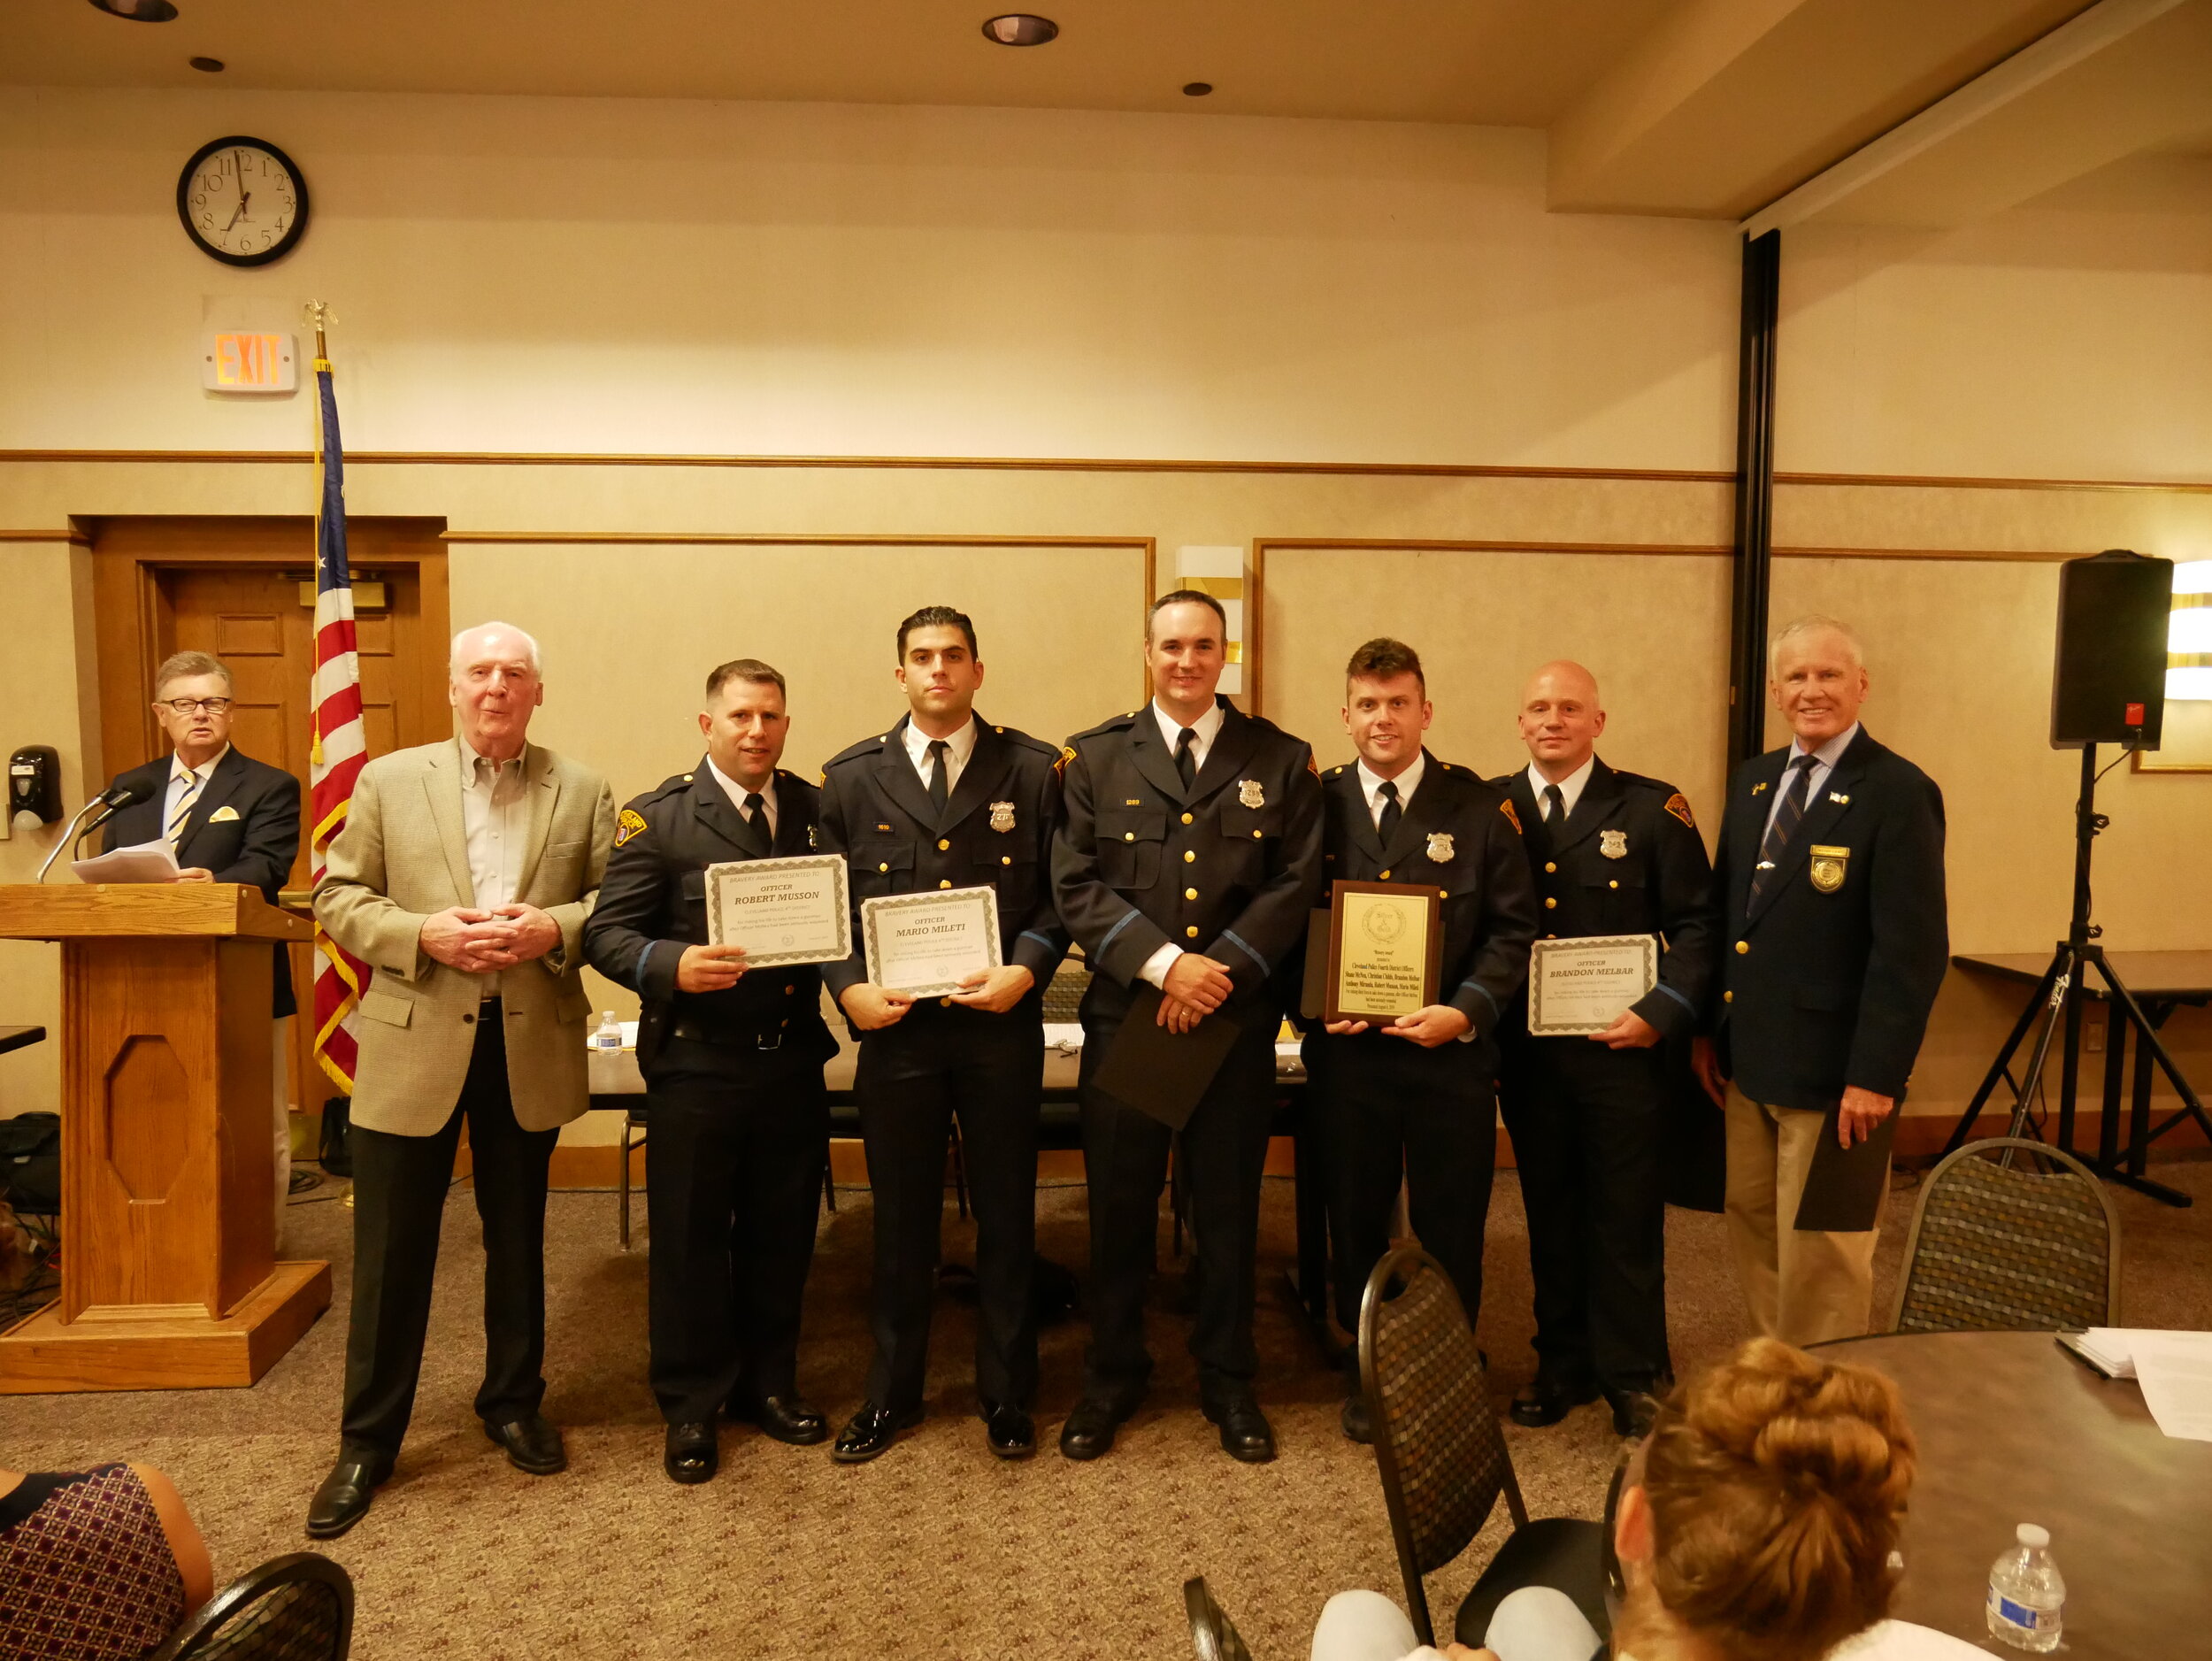  Board Member Mike Dugan at the microphone, Board Member Pat Reynolds with President Tim Leahy on the right presenting a Bravery Award to Officers Robert Musson, Mario Milati, Christopher Childs, Steve McNea, Anthony Miranda, and Brandon Melbar for r